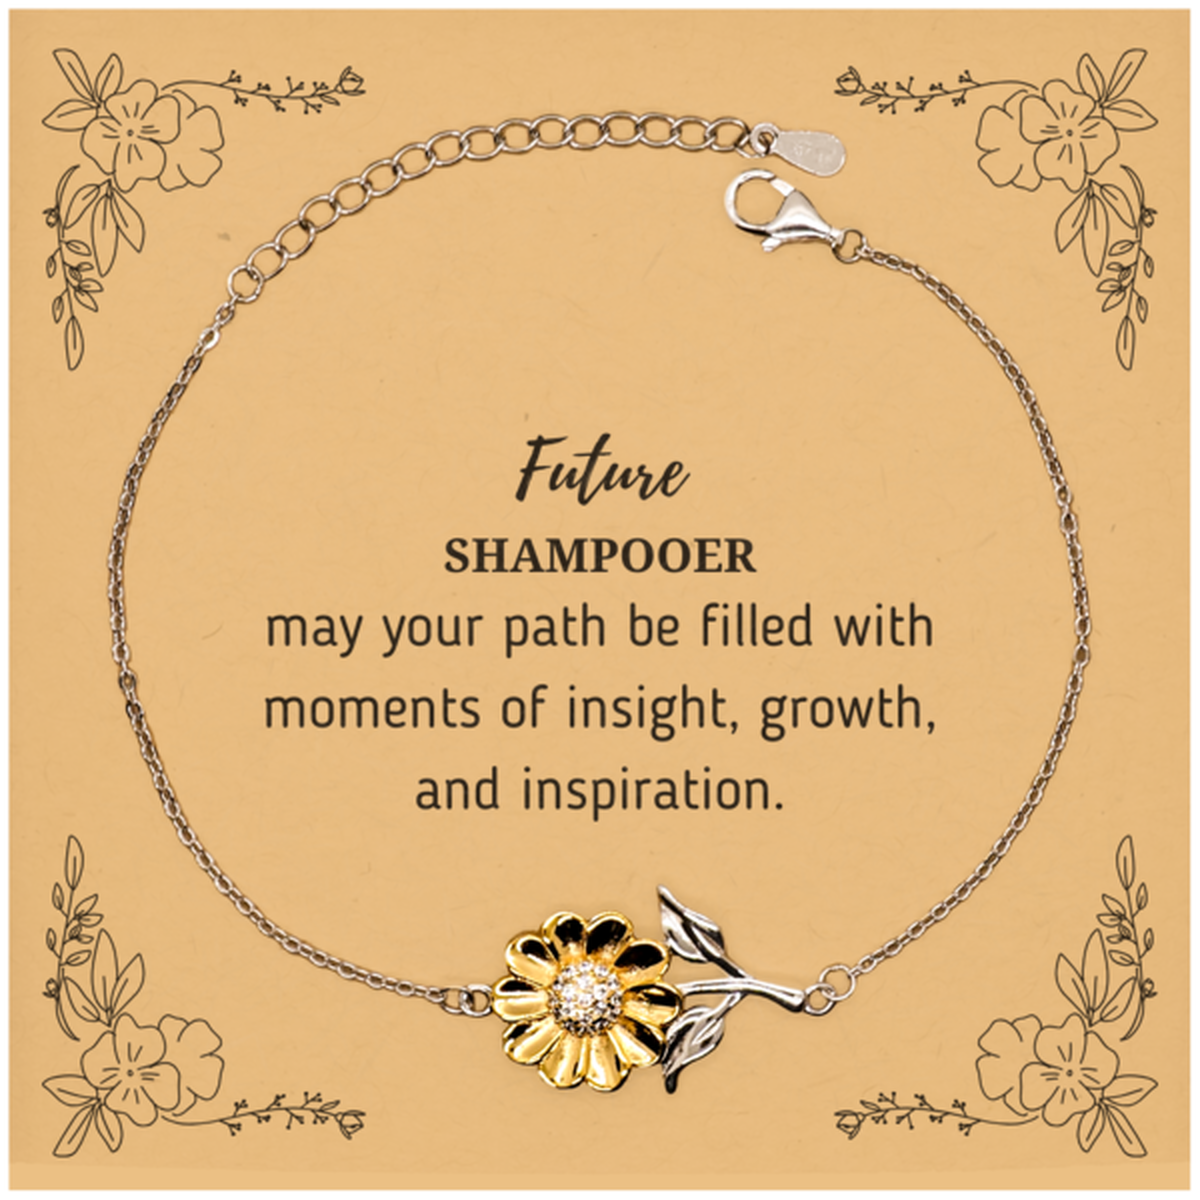 Future Shampooer Gifts, May your path be filled with moments of insight, Graduation Gifts for New Shampooer, Christmas Unique Sunflower Bracelet For Men, Women, Friends